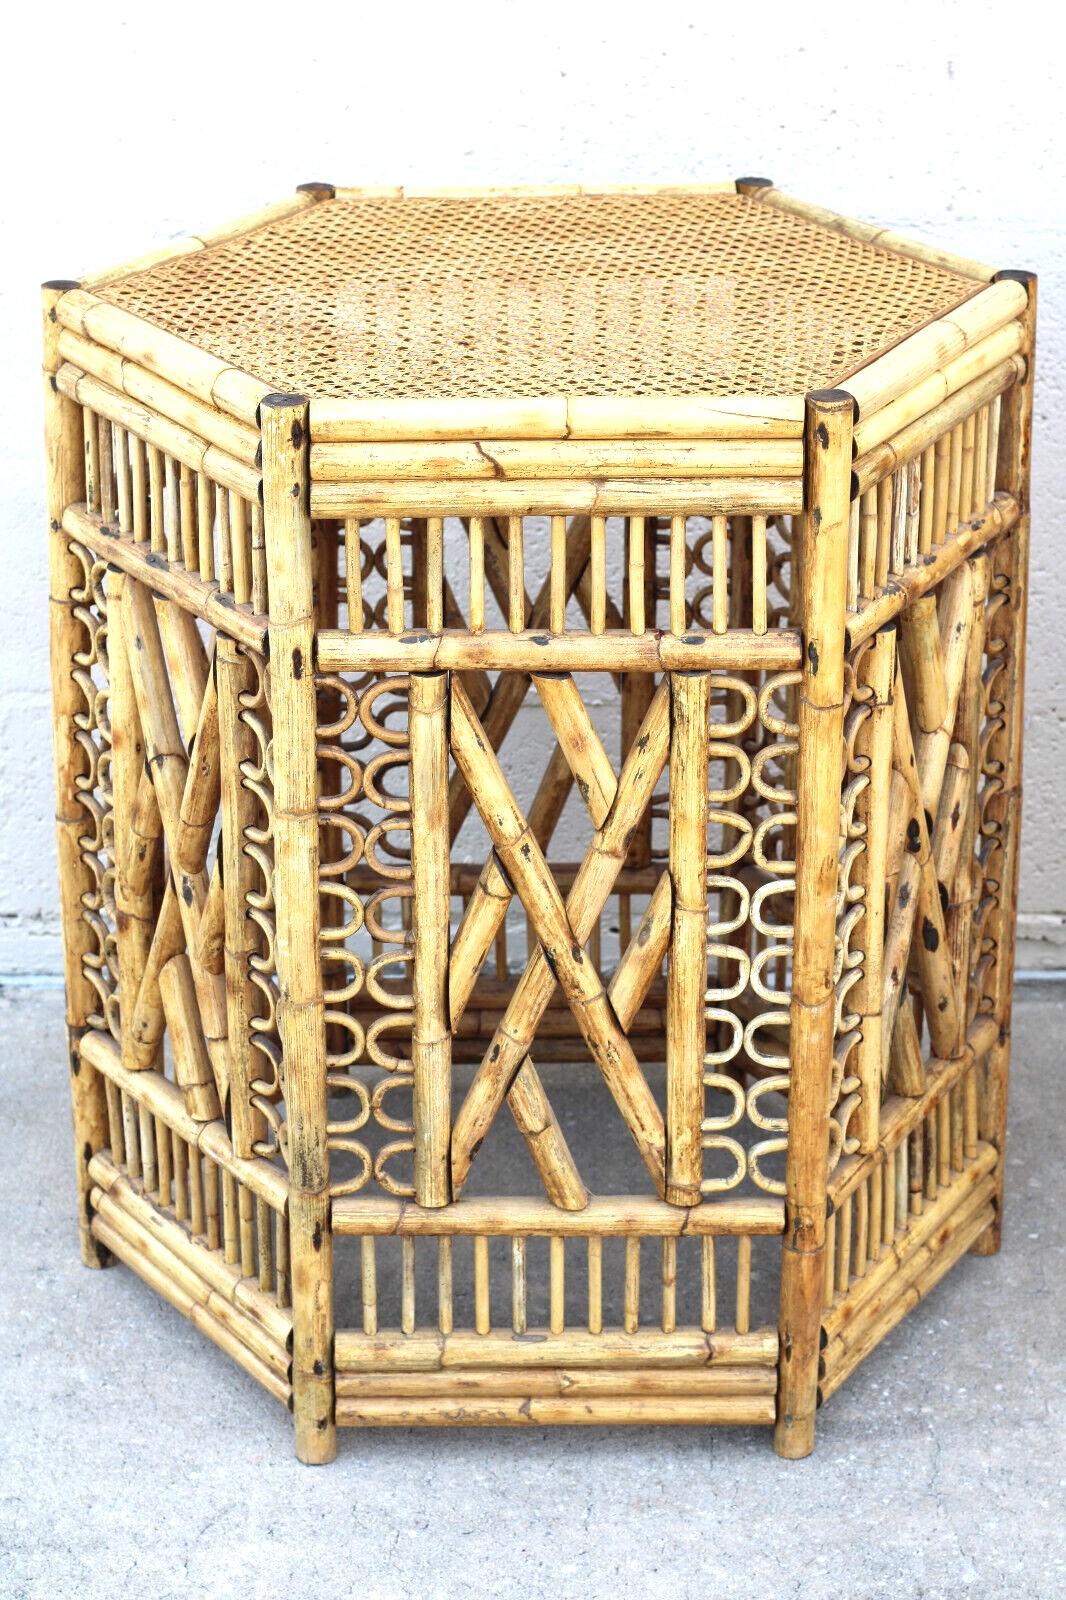 Pair of Brighton Style Bamboo and Cane Hexagonal Dining Table Bases In Good Condition For Sale In Vero Beach, FL